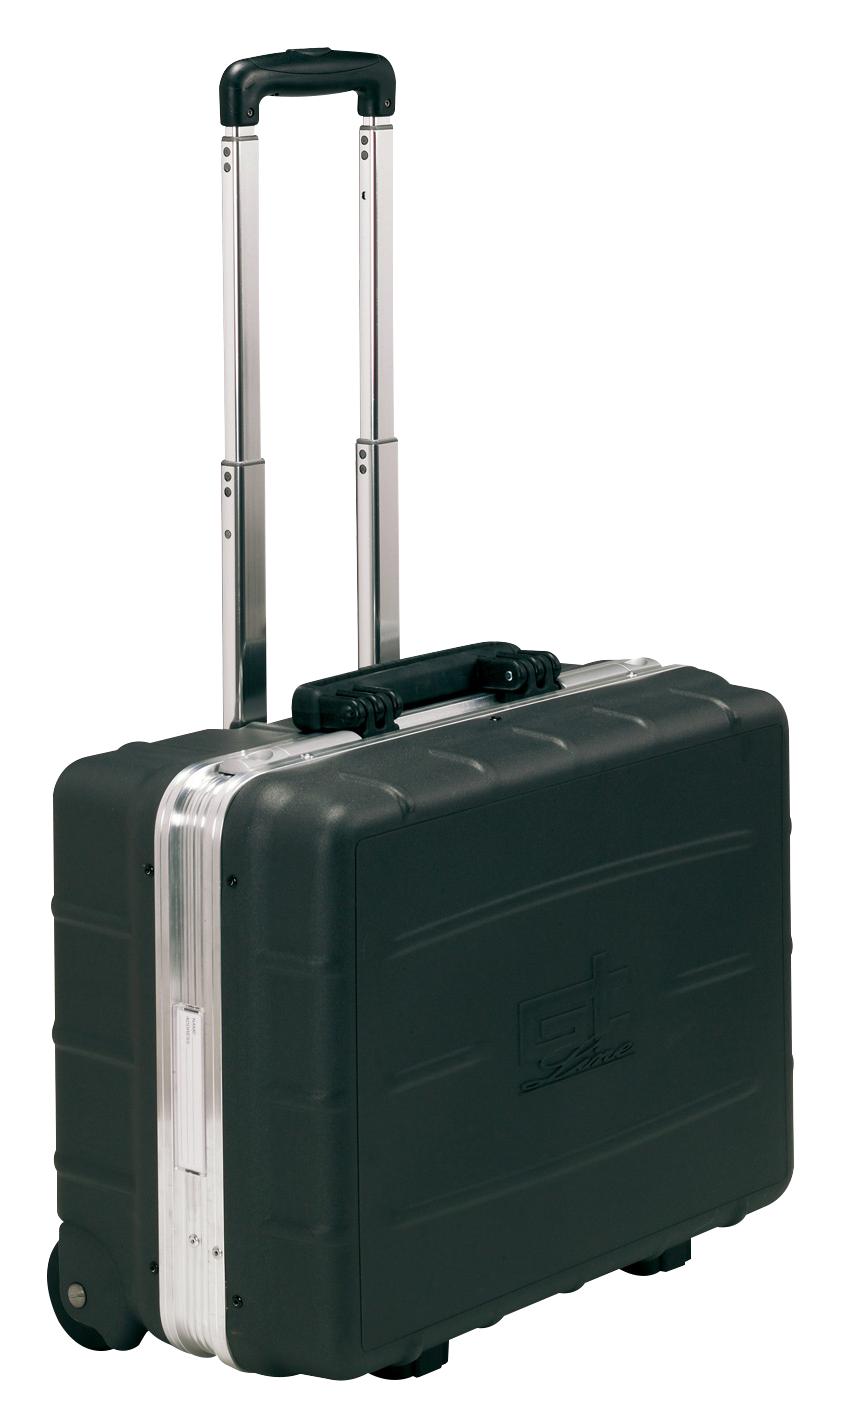 ATOMIK WH PTS TOOL CASE TROLLEY, 465 X 352 X 255MM, PP GT LINE